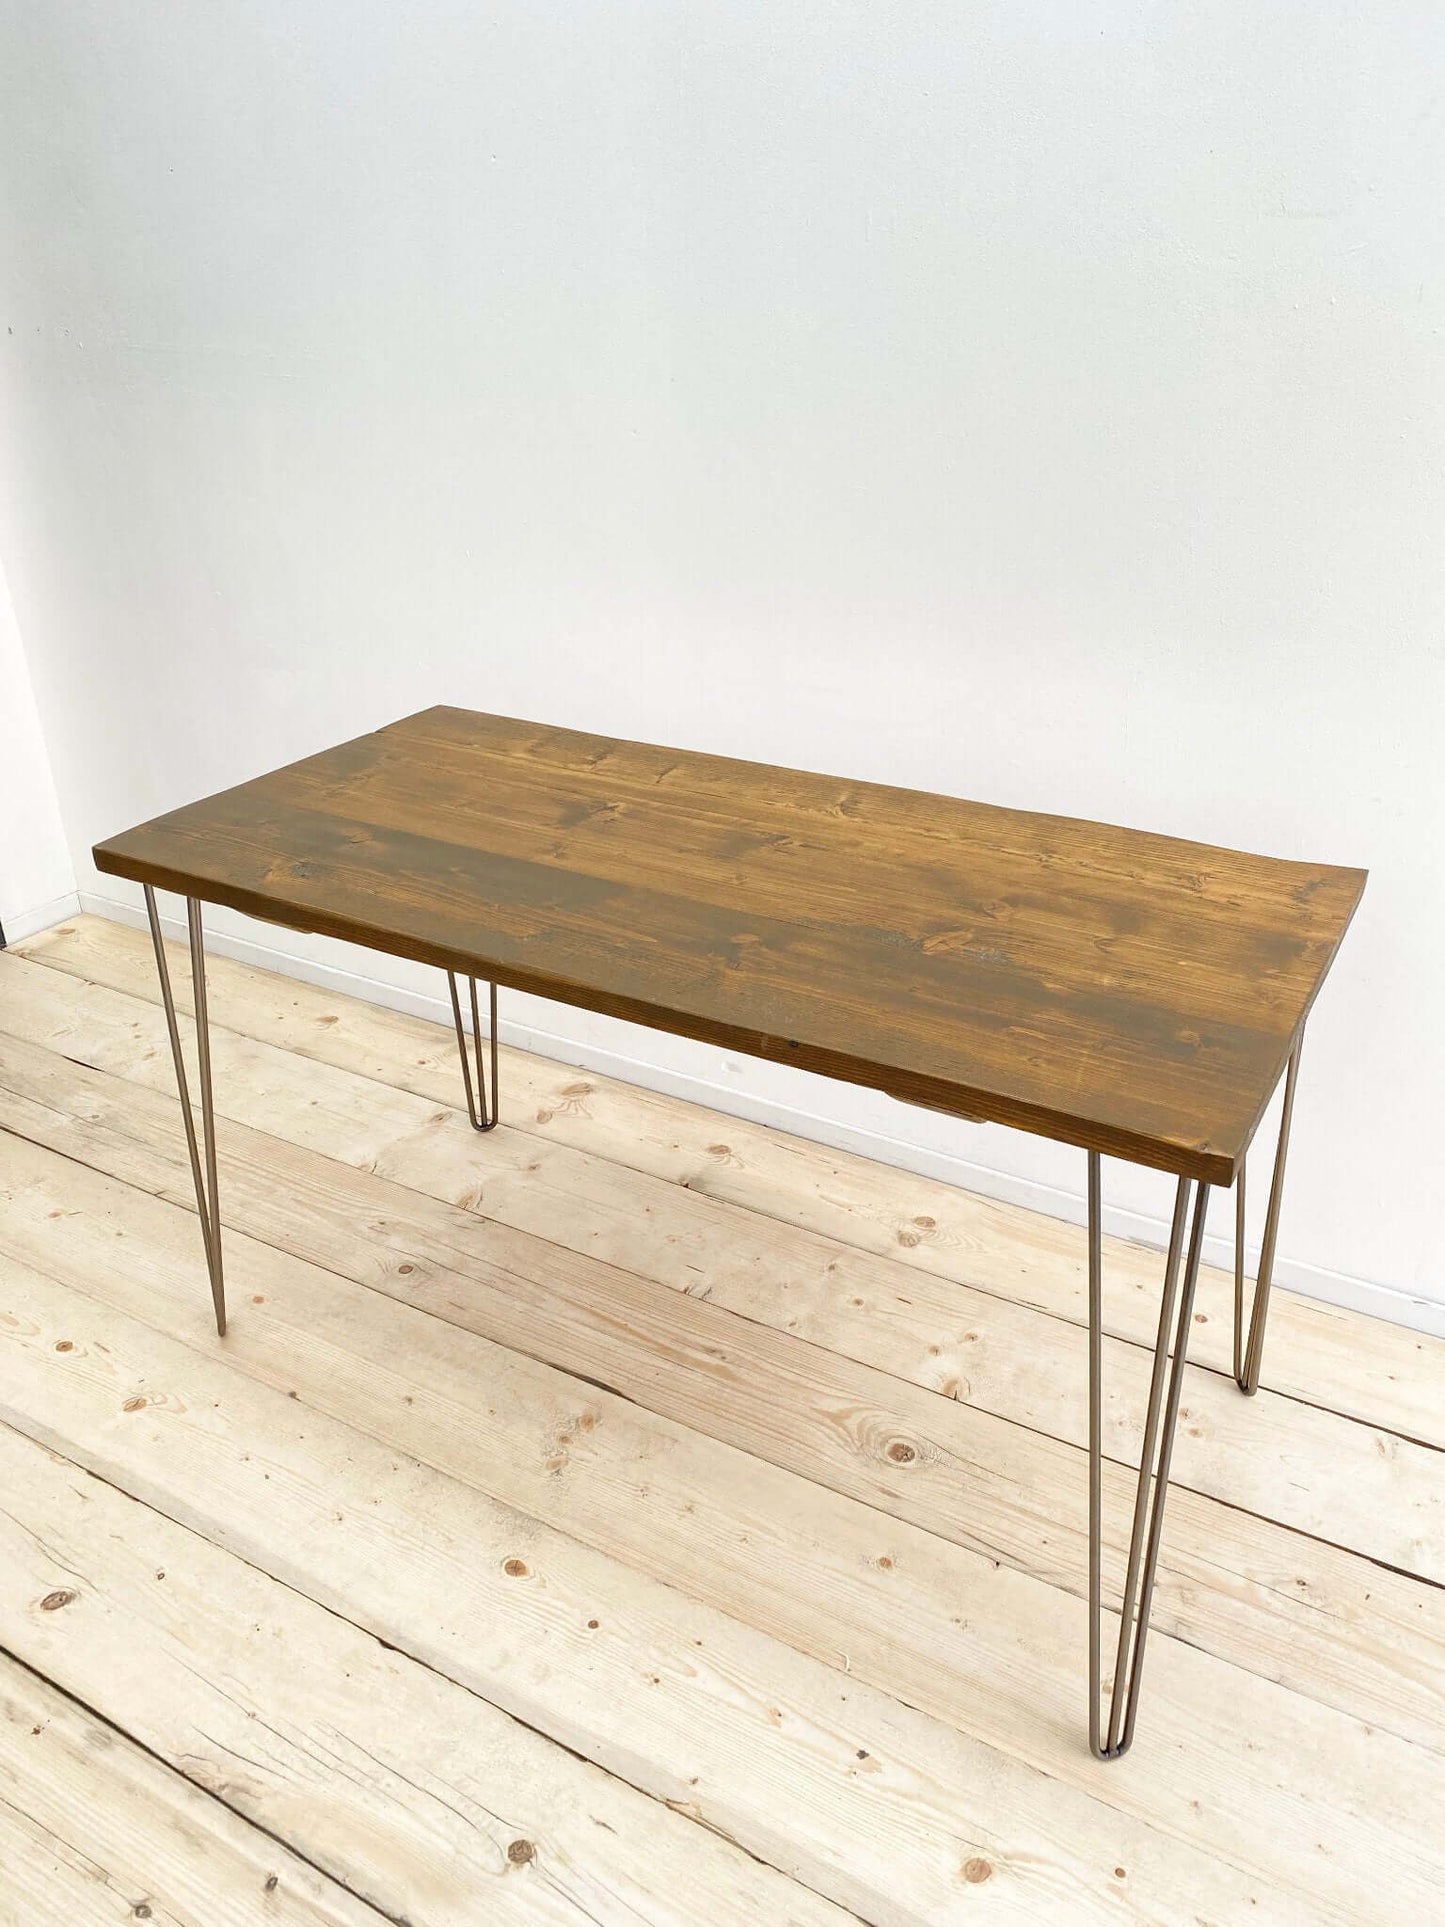 Reclaimed wood outdoor table with hairpin legs.